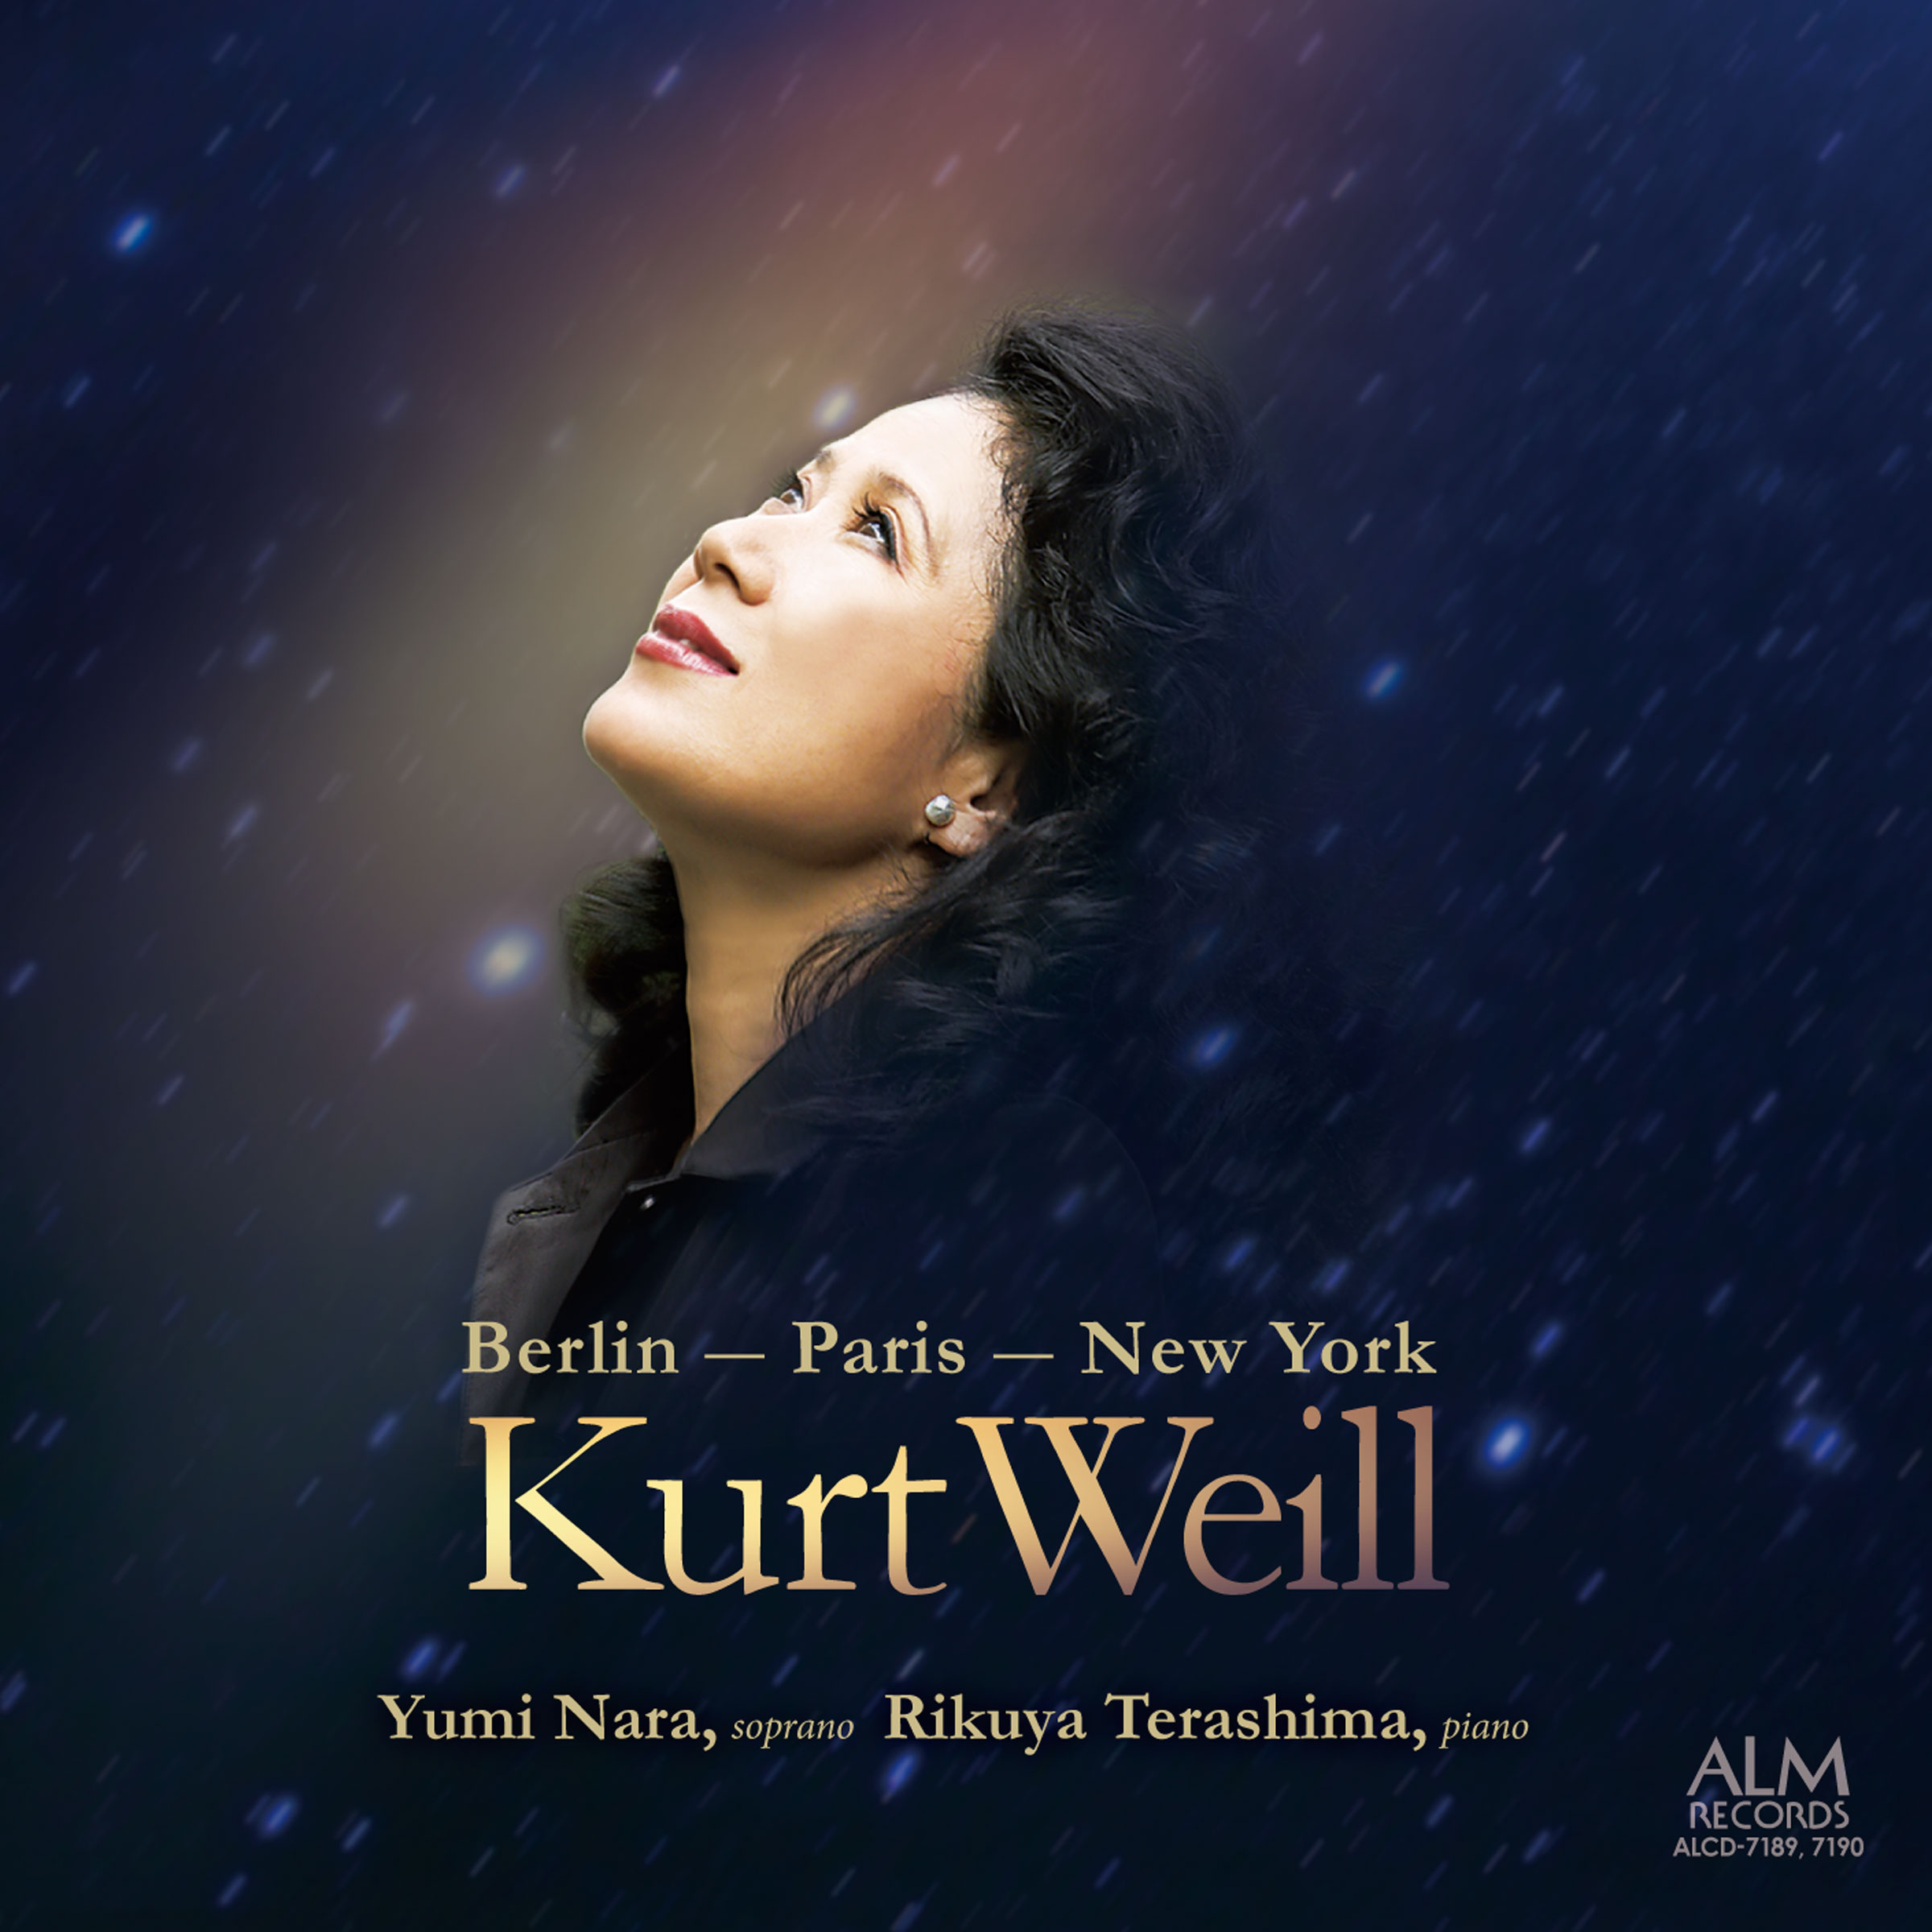 Weill CD cover